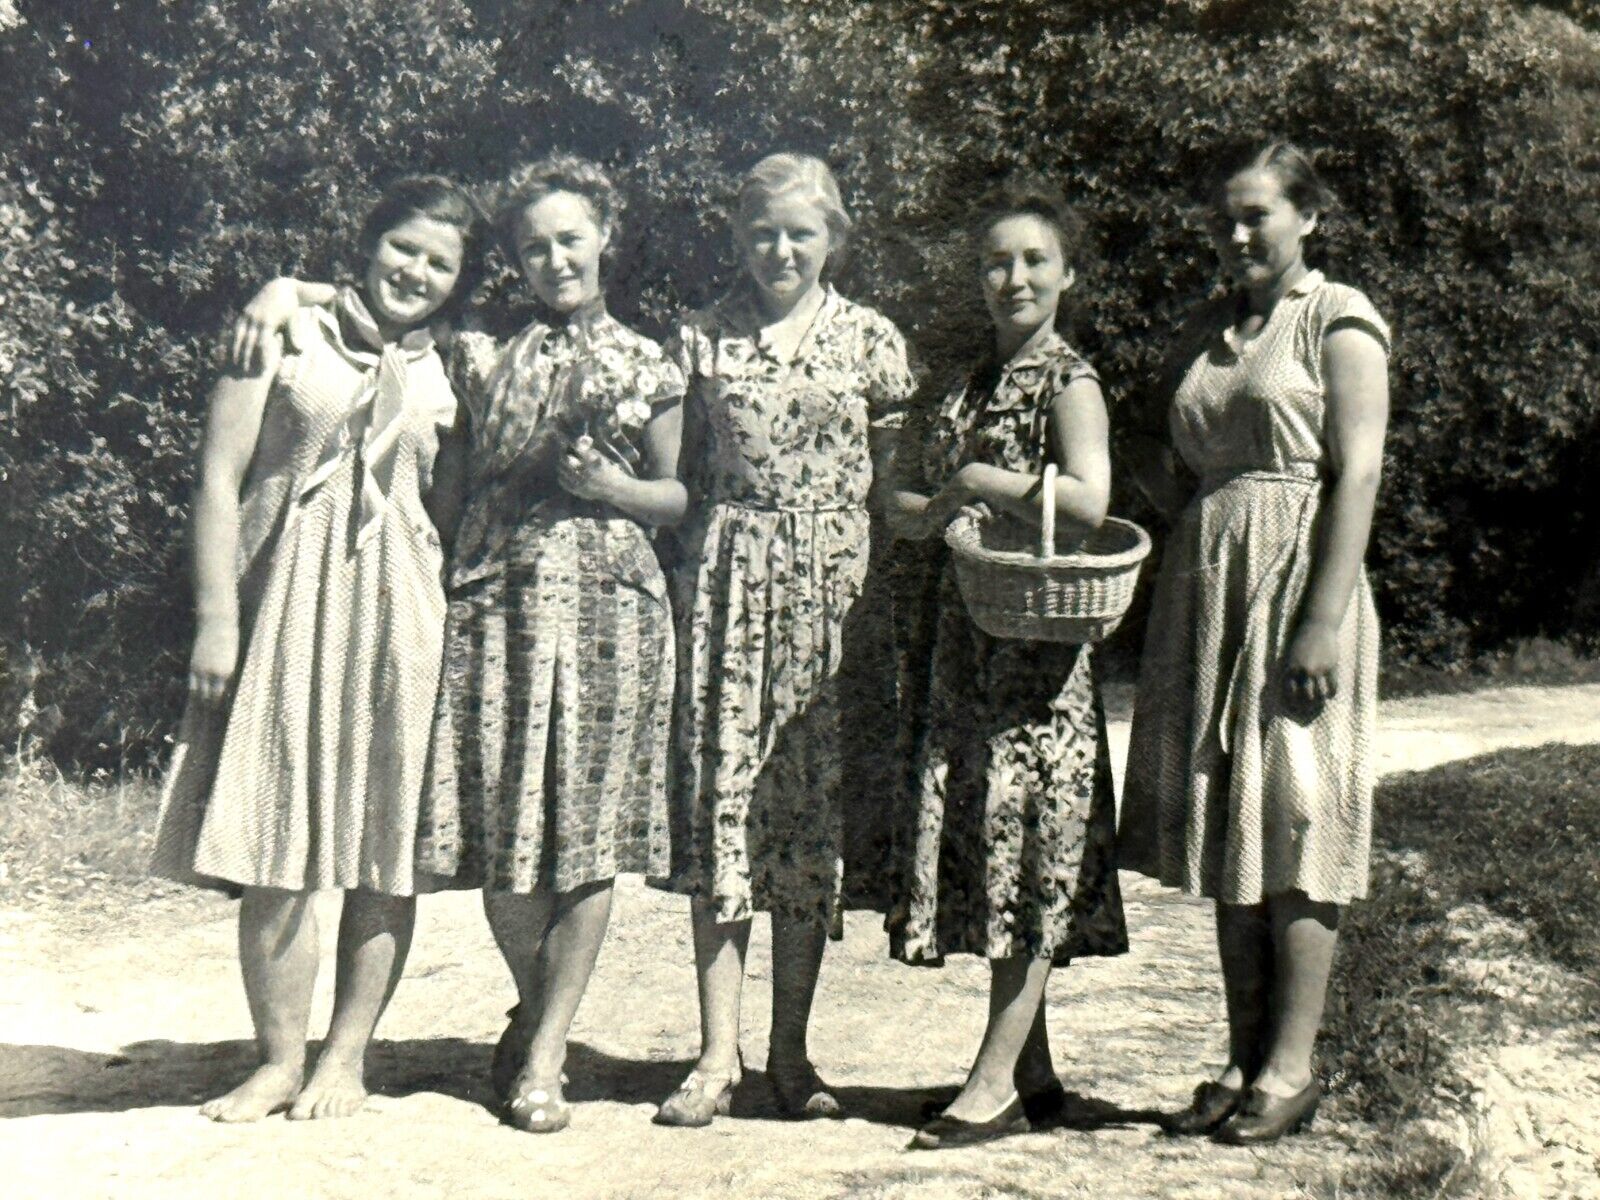 1950s Five Happy Pretty Young Women Smiling Girlfriends Vintage Photo Snapshot